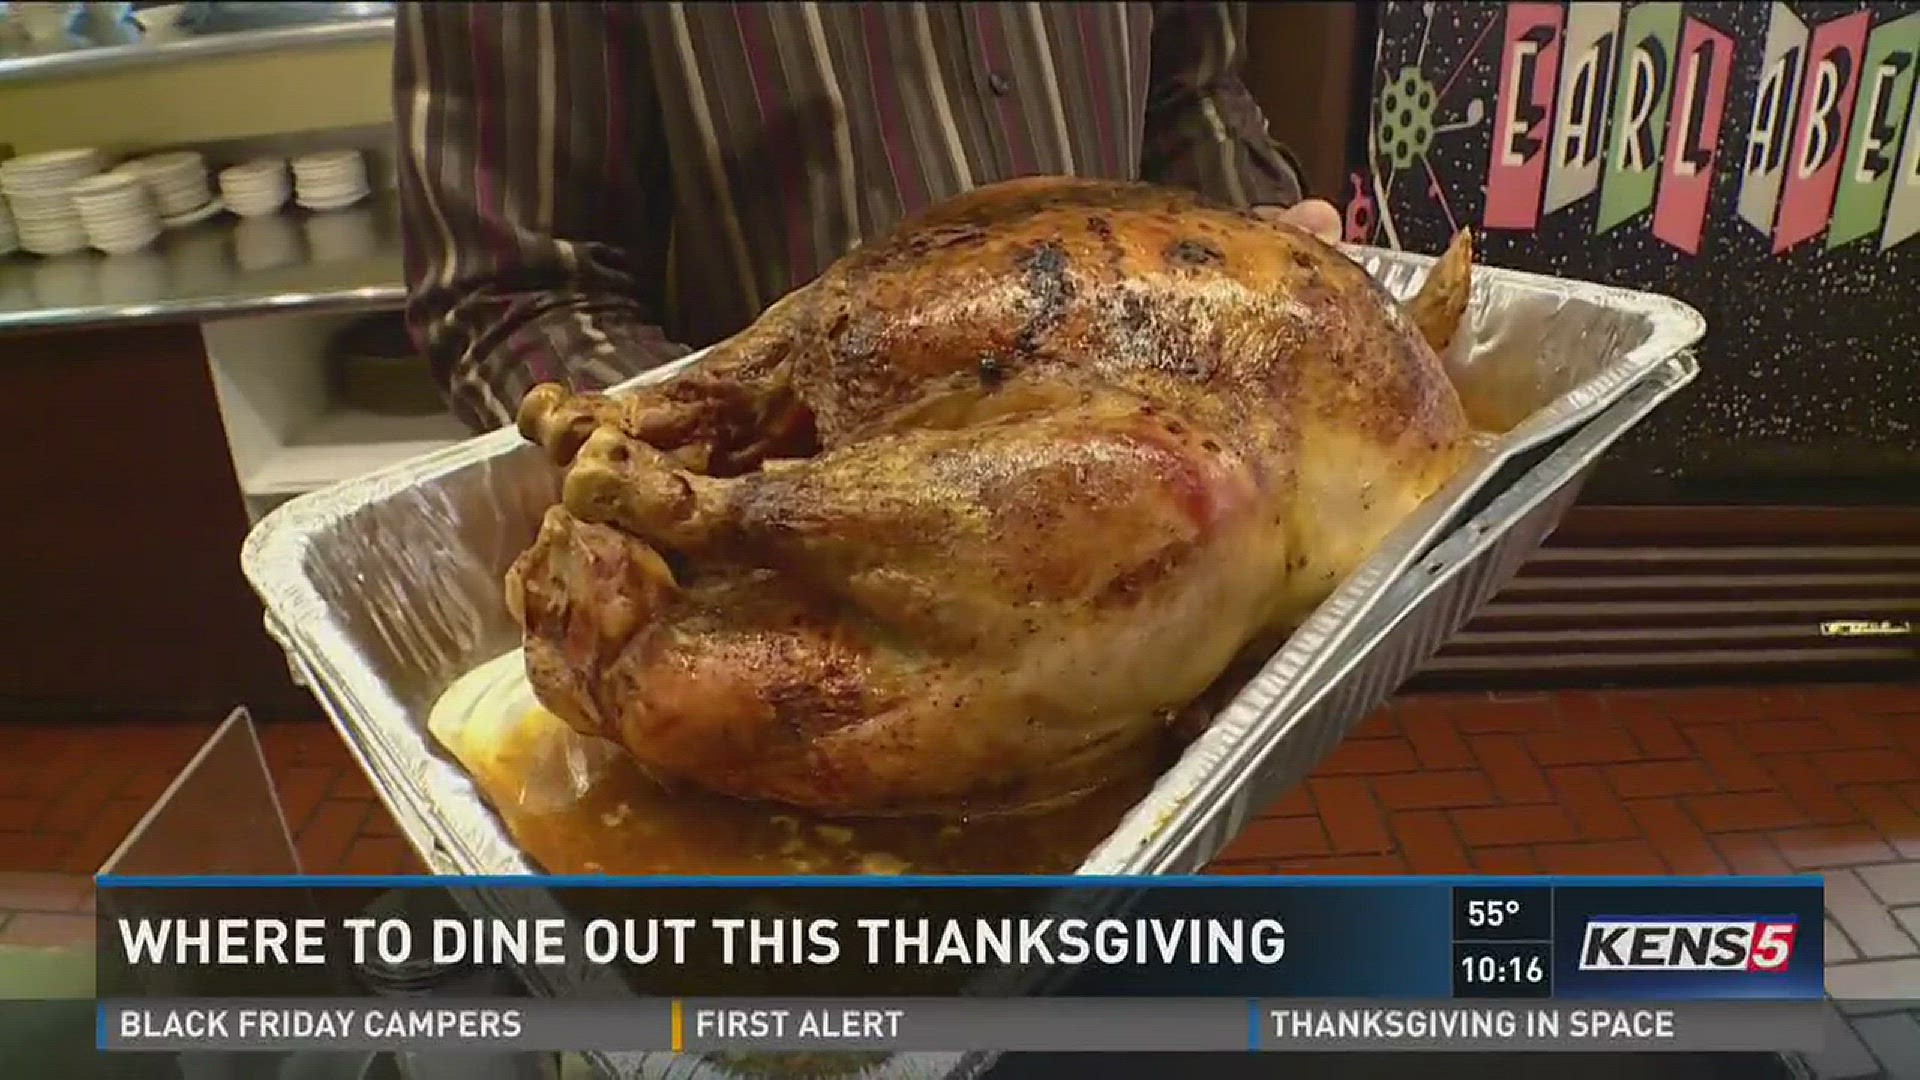 Where to dine out this Thanksgiving